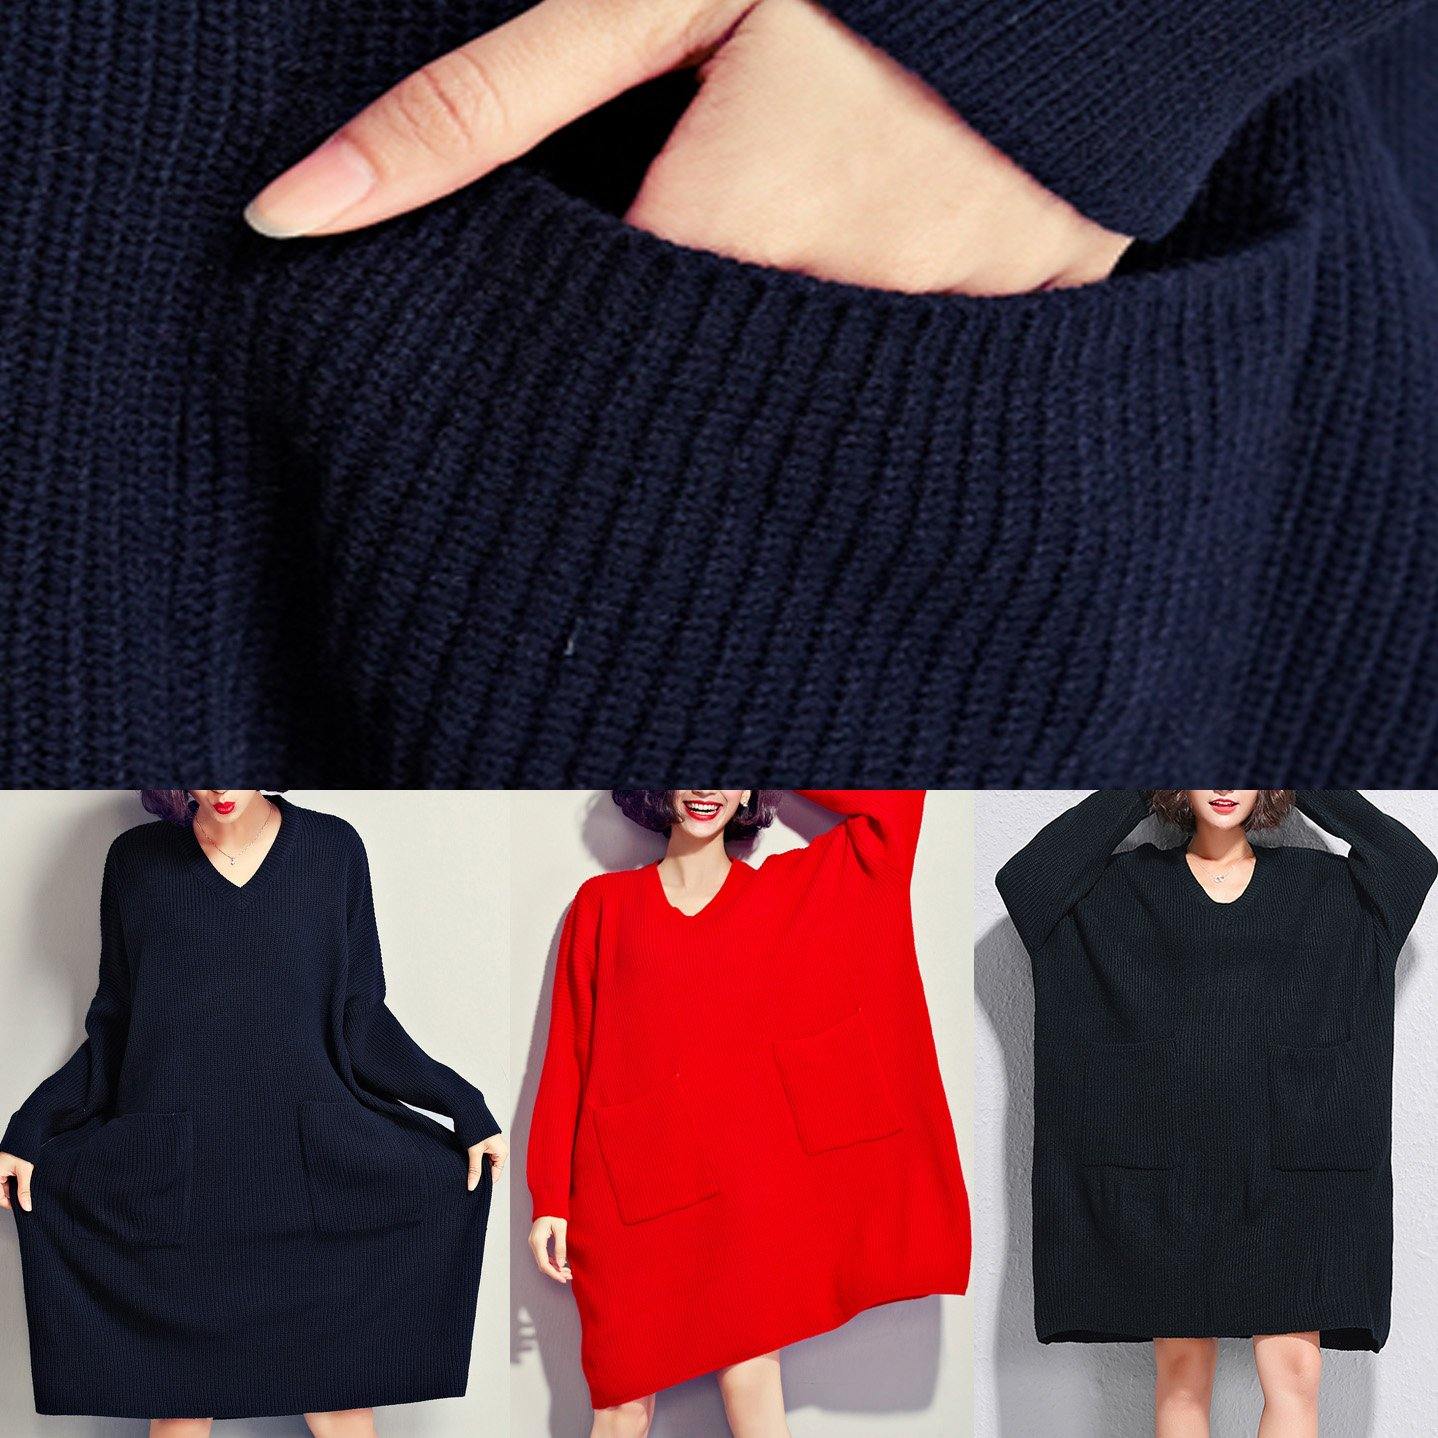 Women red Sweater dress outfit Quotes v neck DIY knitwear big pockets - Omychic